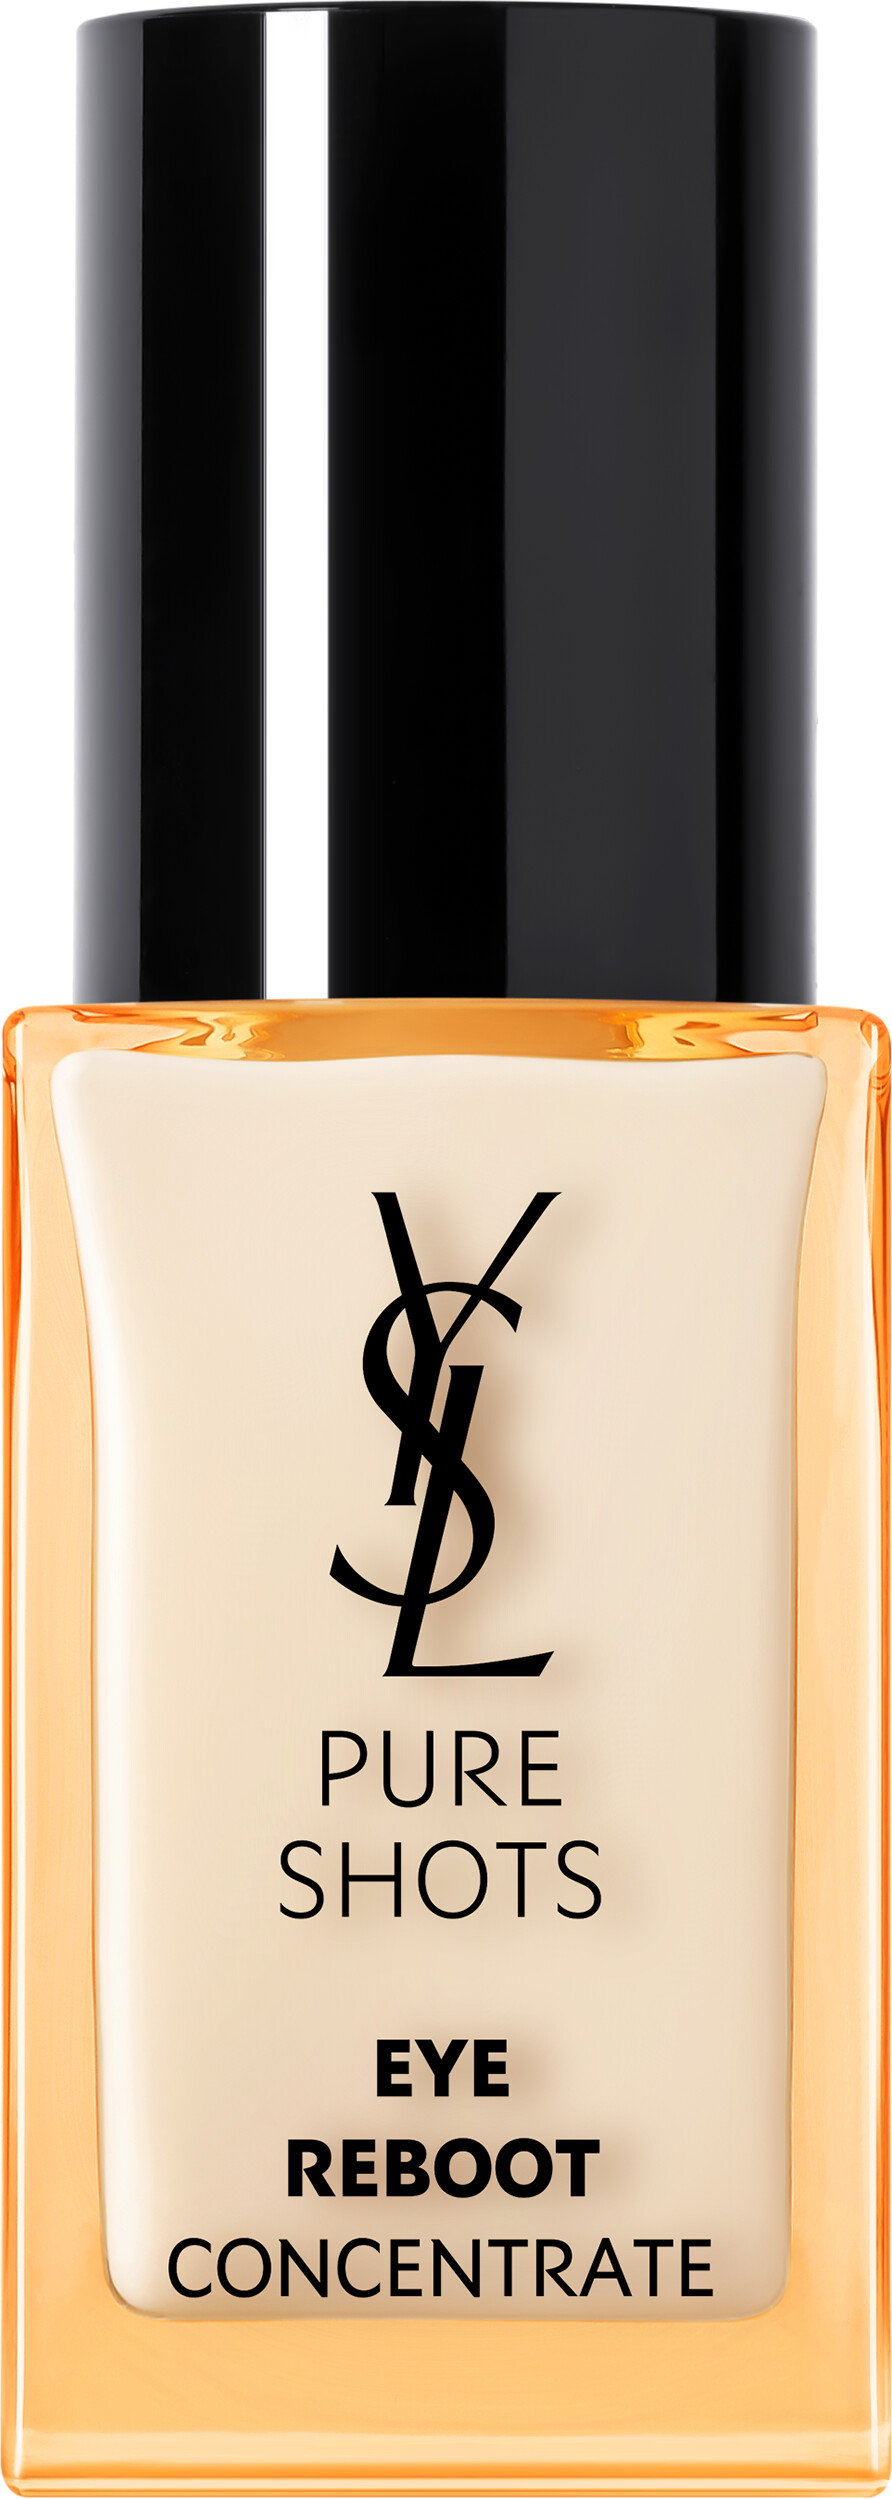 Yves Saint Laurent Pure Shots Eye Reboot Concentrate 20ml